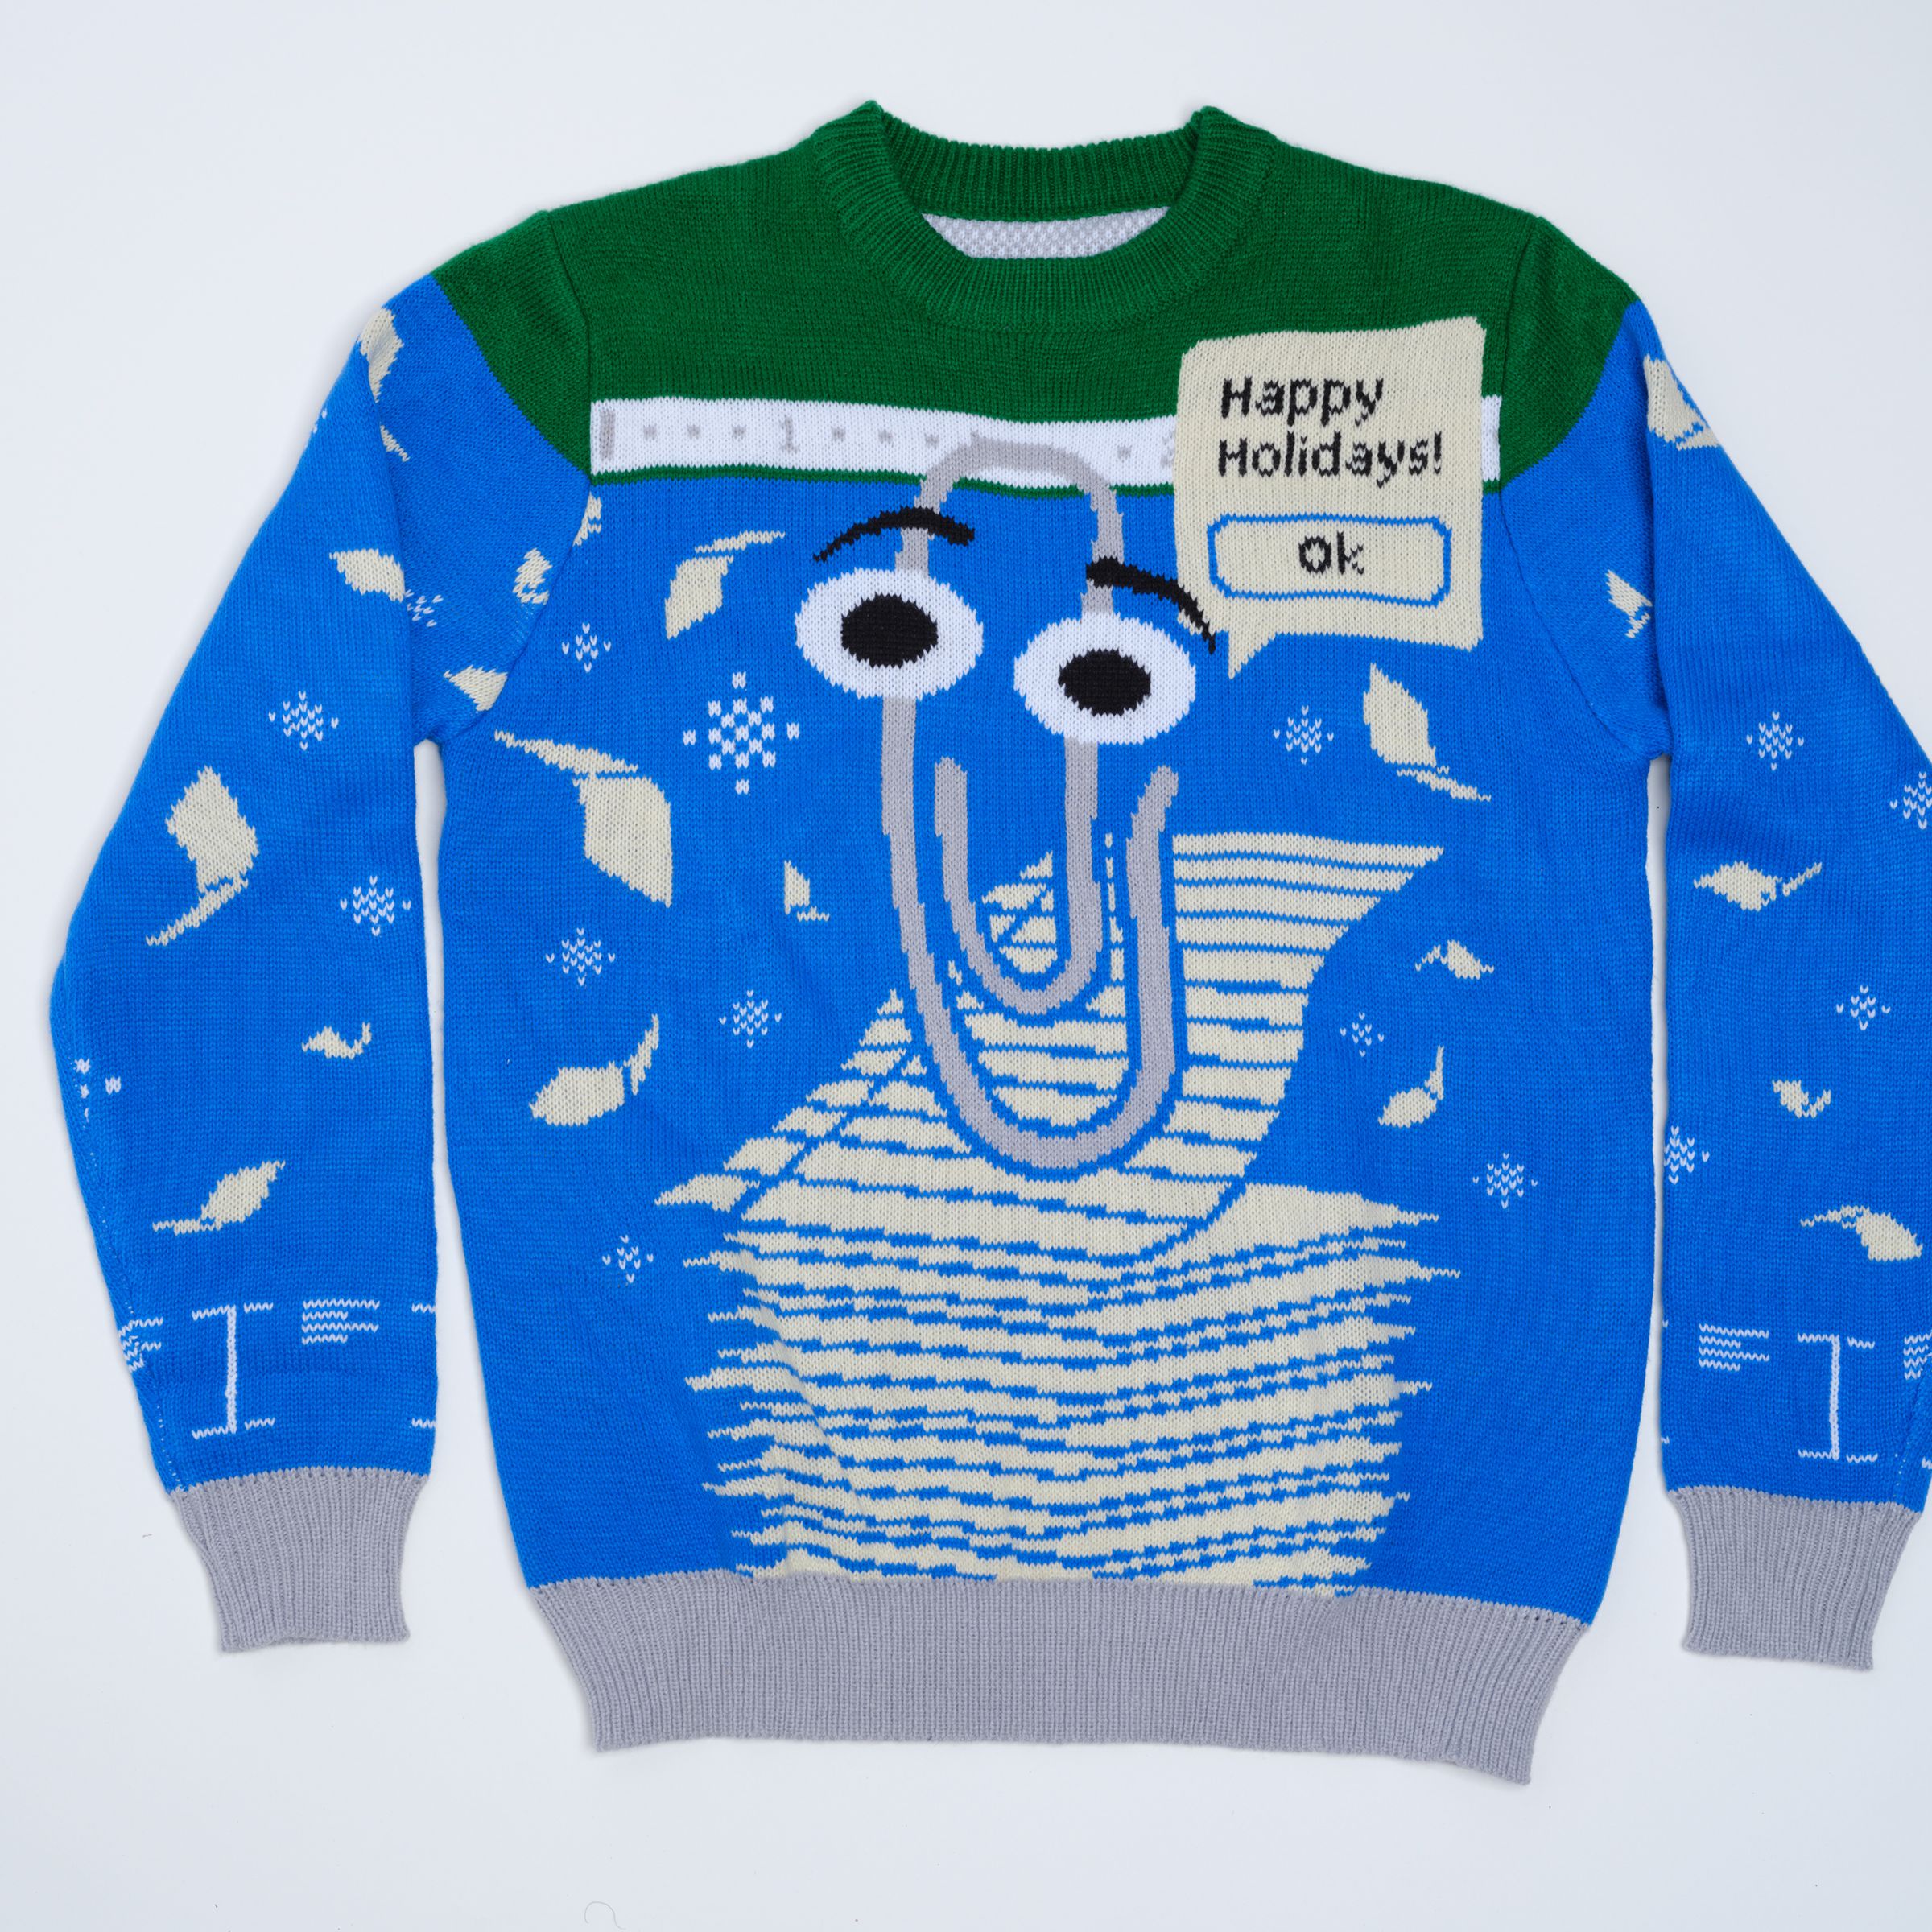 Clippy is Microsoft’s latest ugly sweater